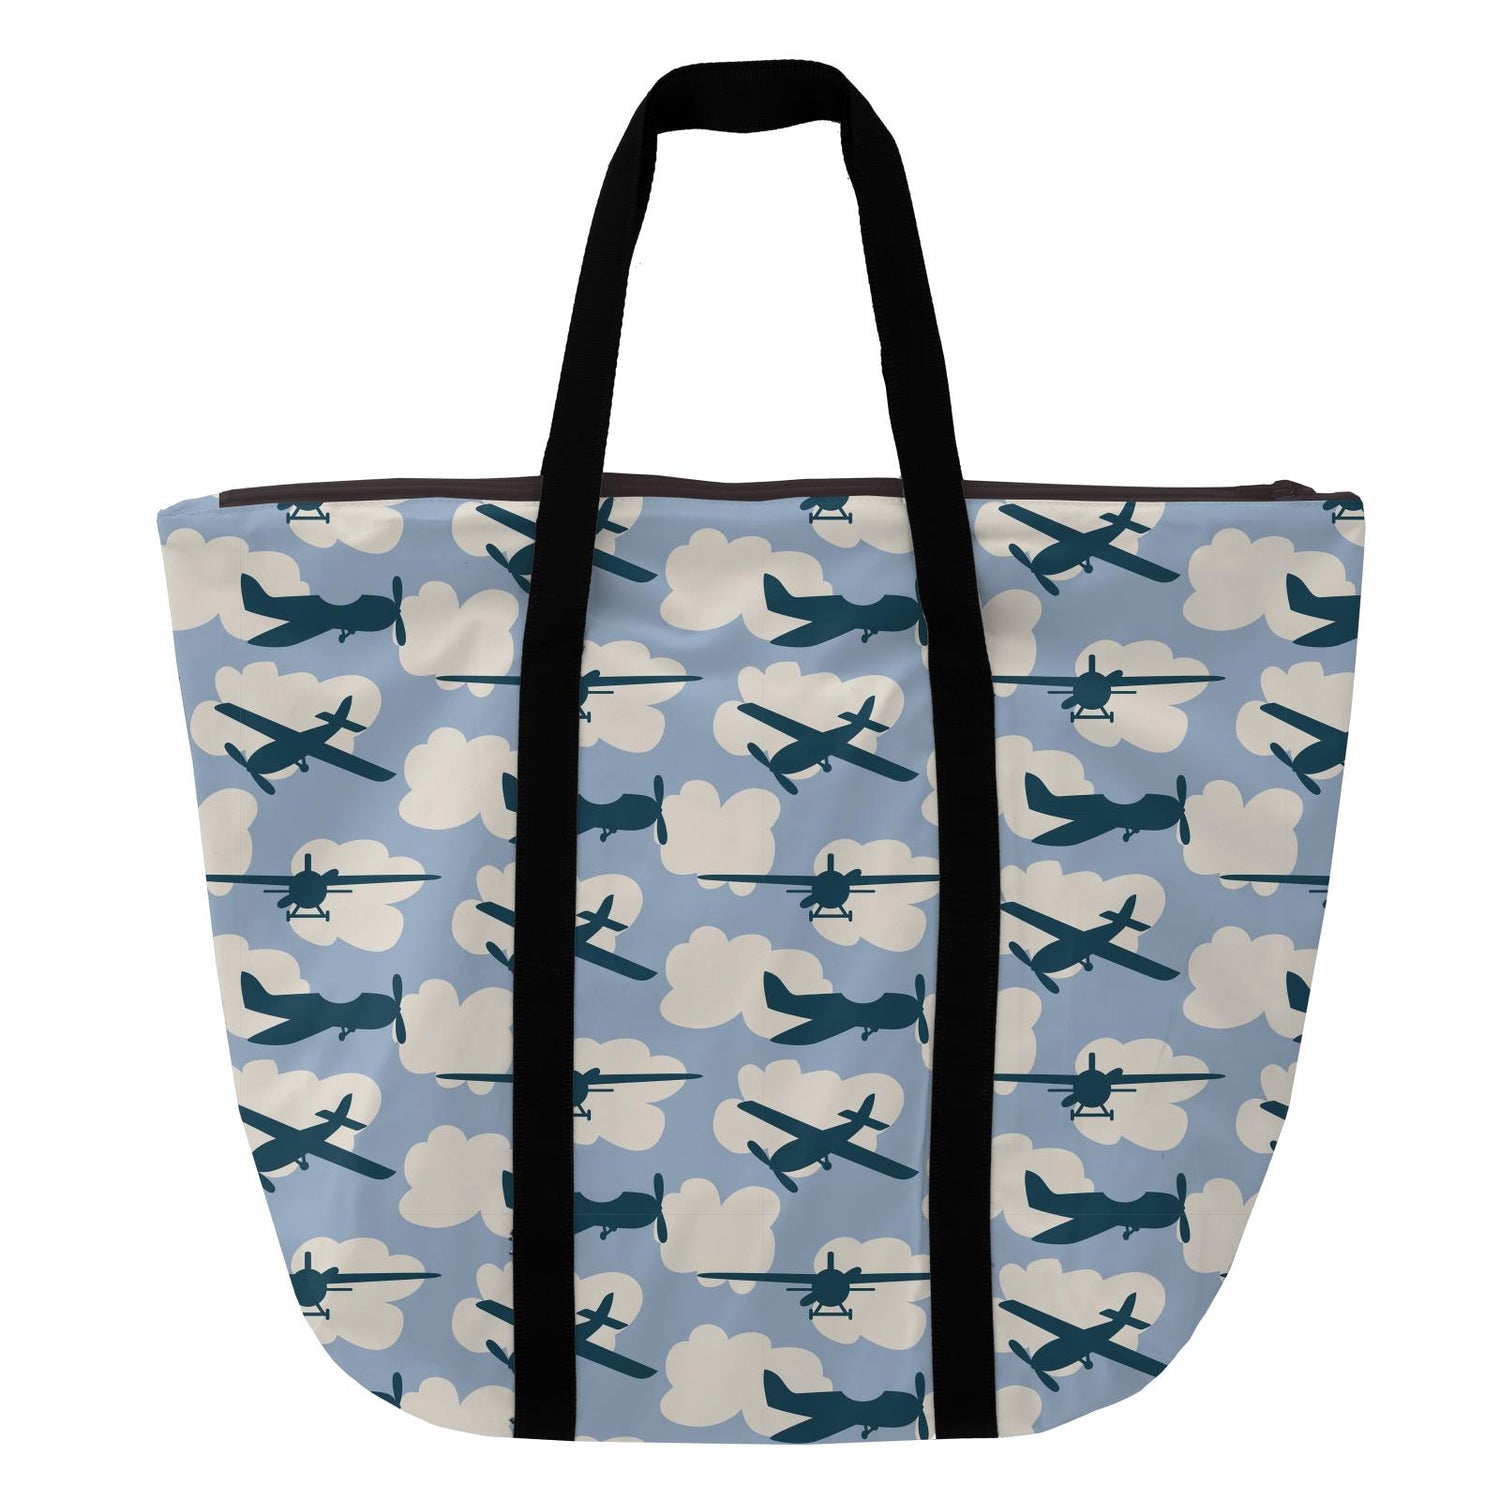 Print Coated Woven Tote Bag in Pond Planes